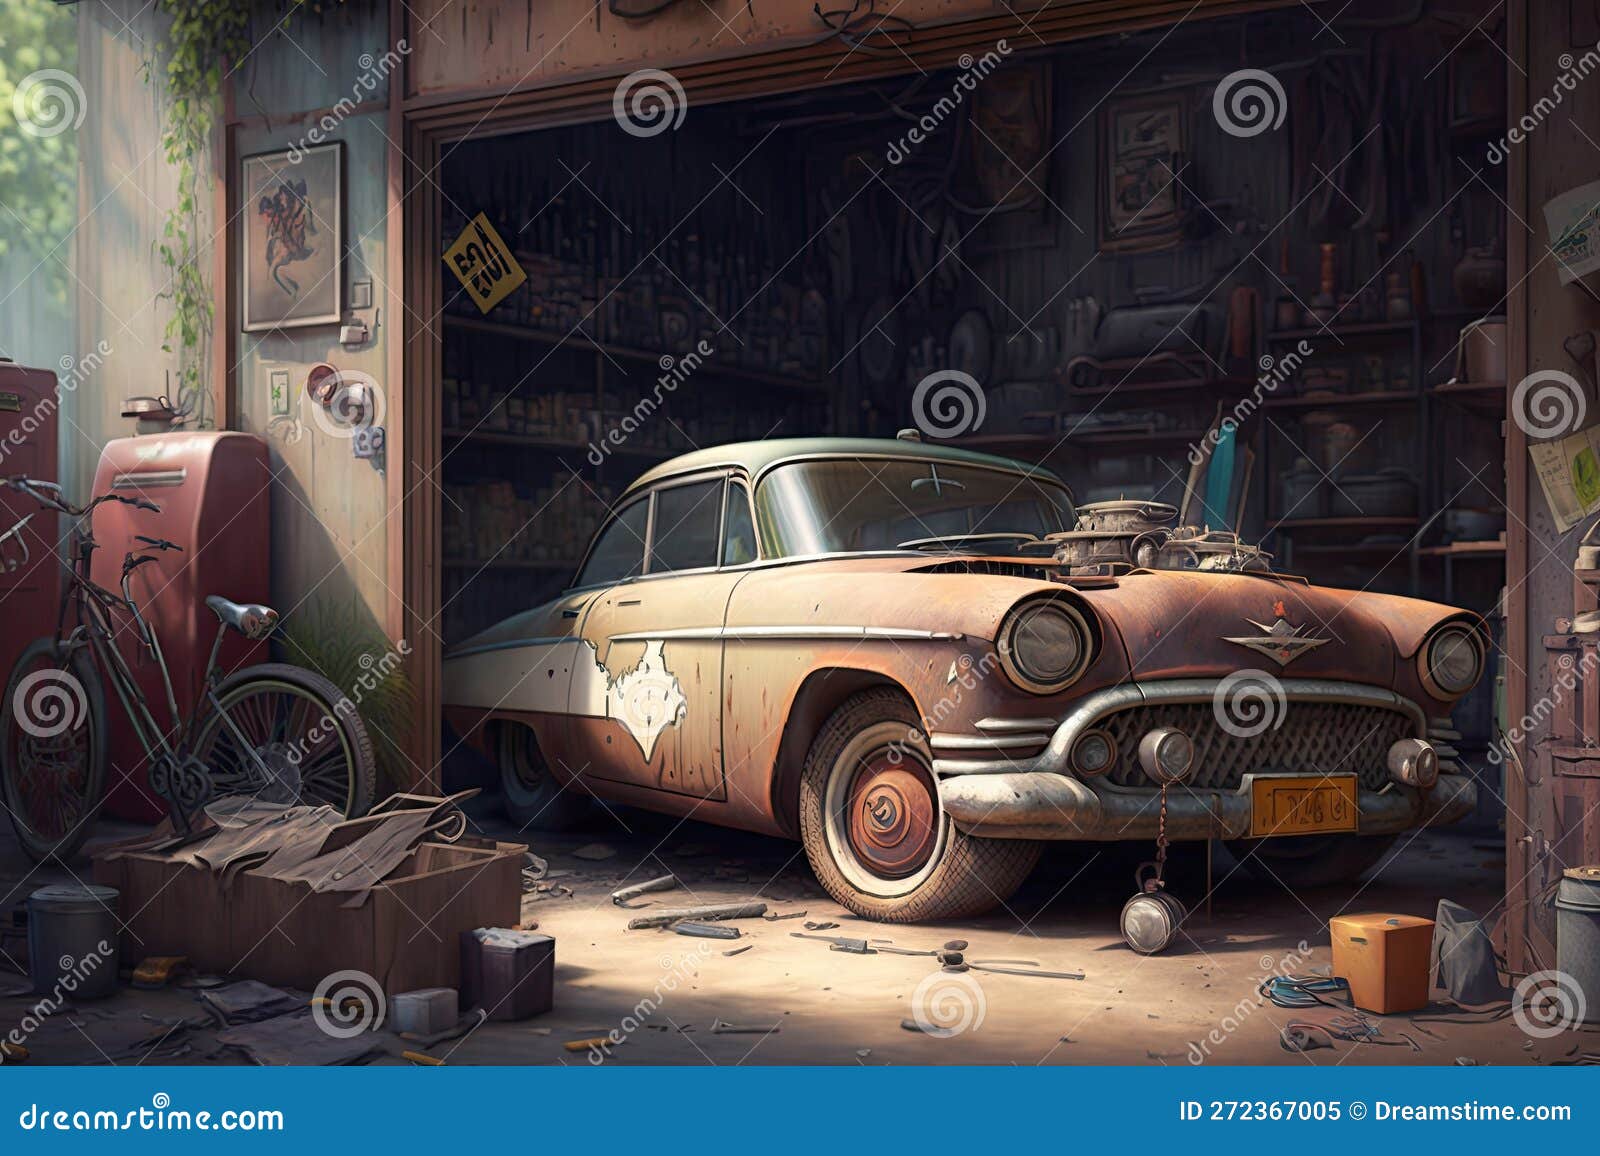 2,108 Oldtimer Car Garage Images, Stock Photos, 3D objects